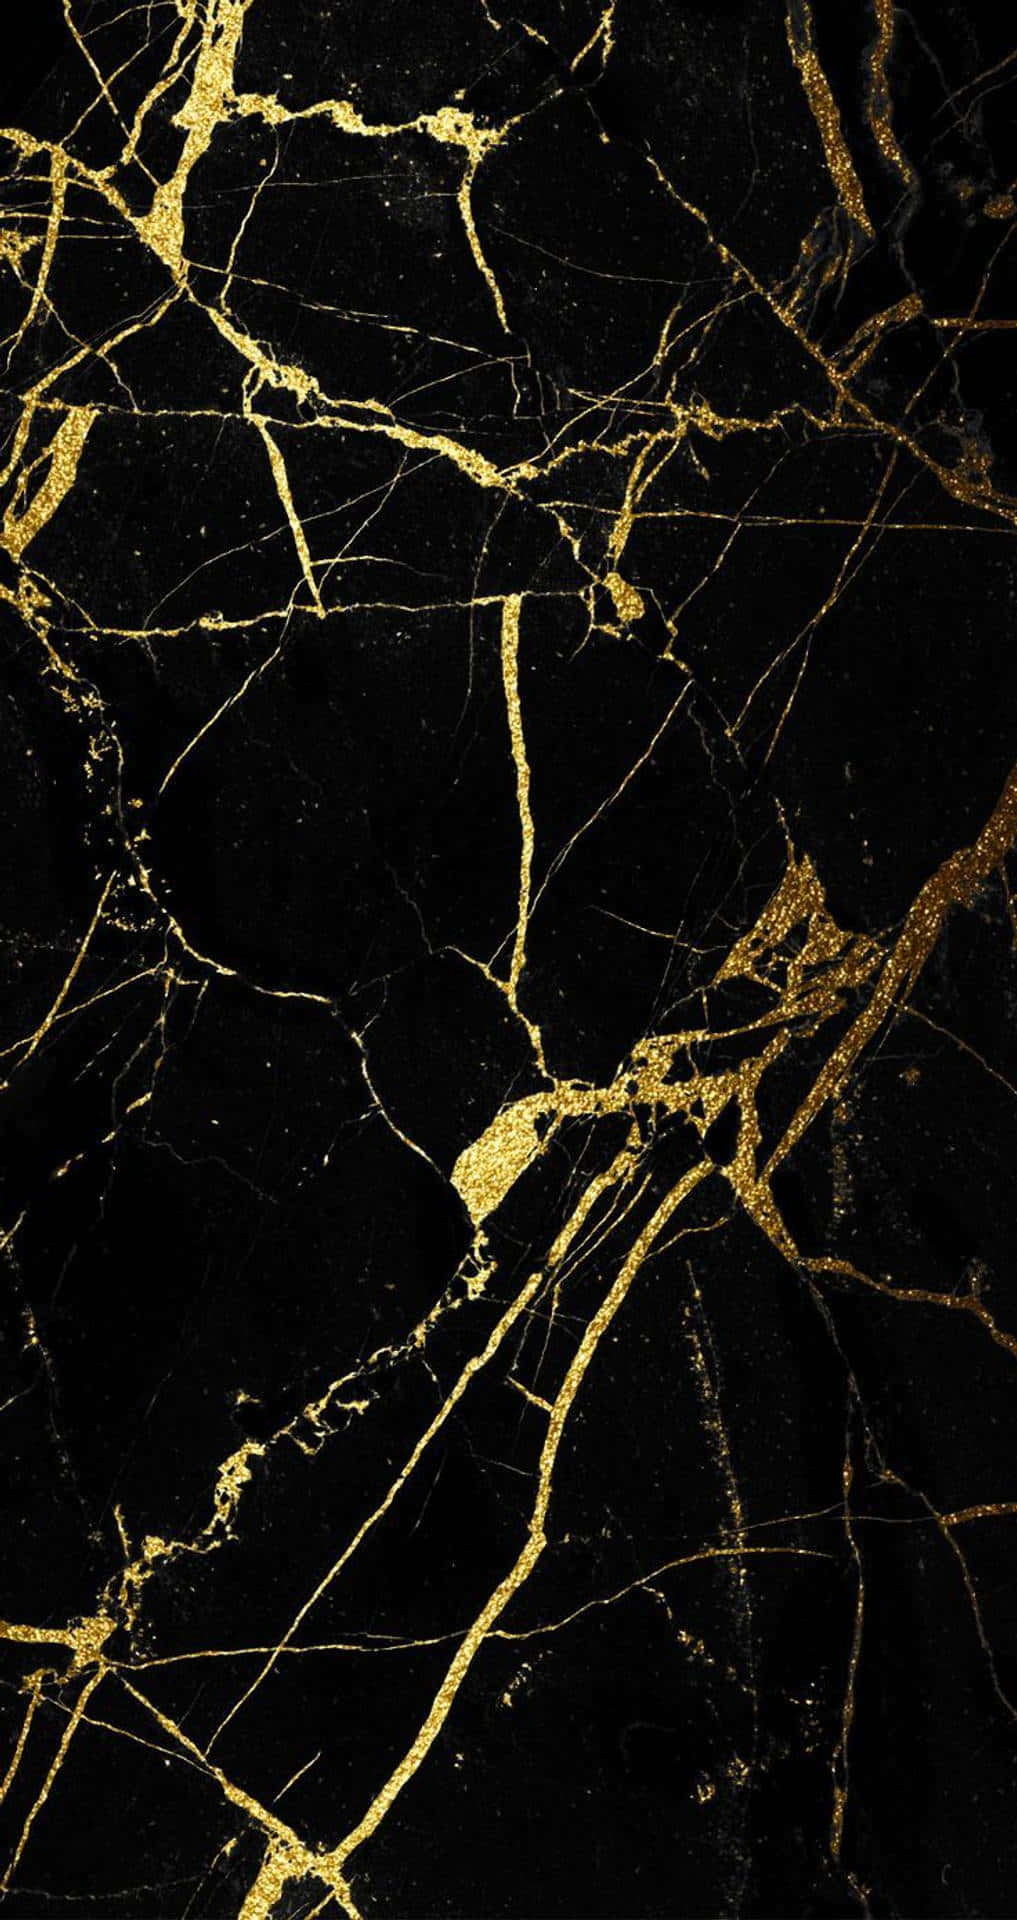 Striking Aesthetic of Black and Gold Wallpaper